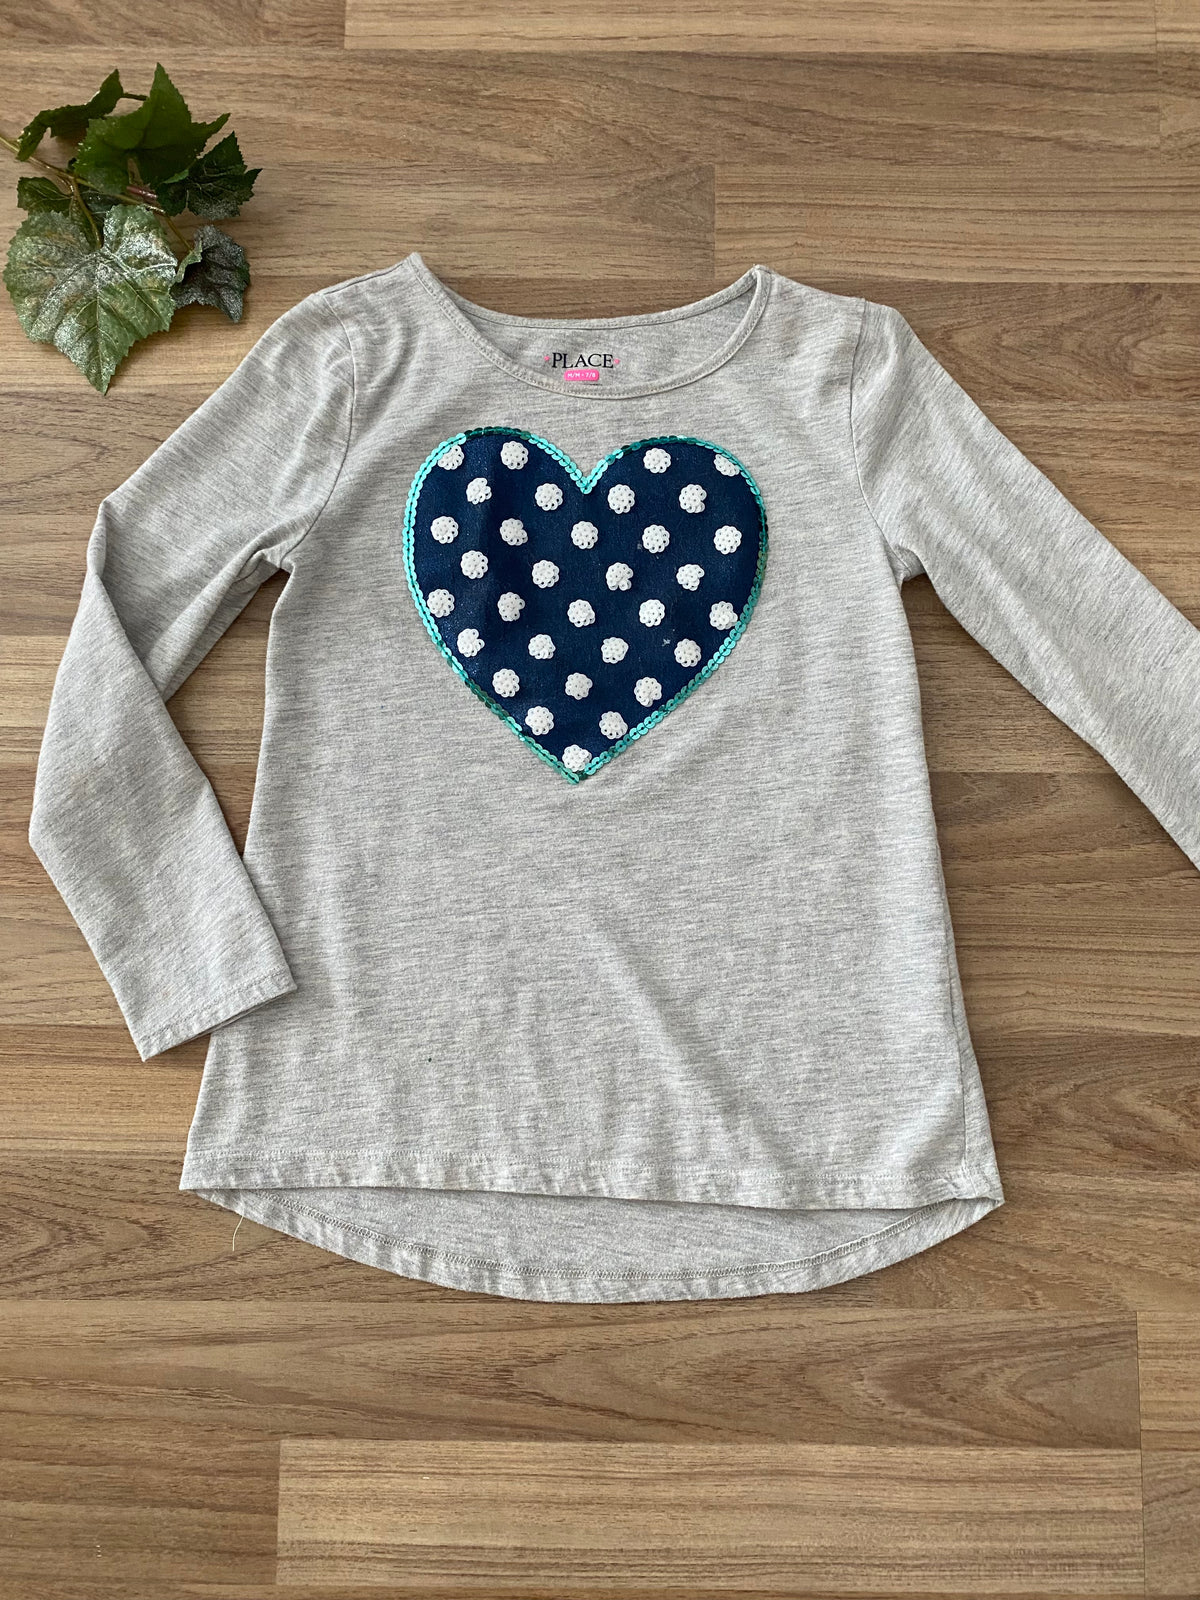 Long Sleeve Graphic Top (Girls Size 7-8)